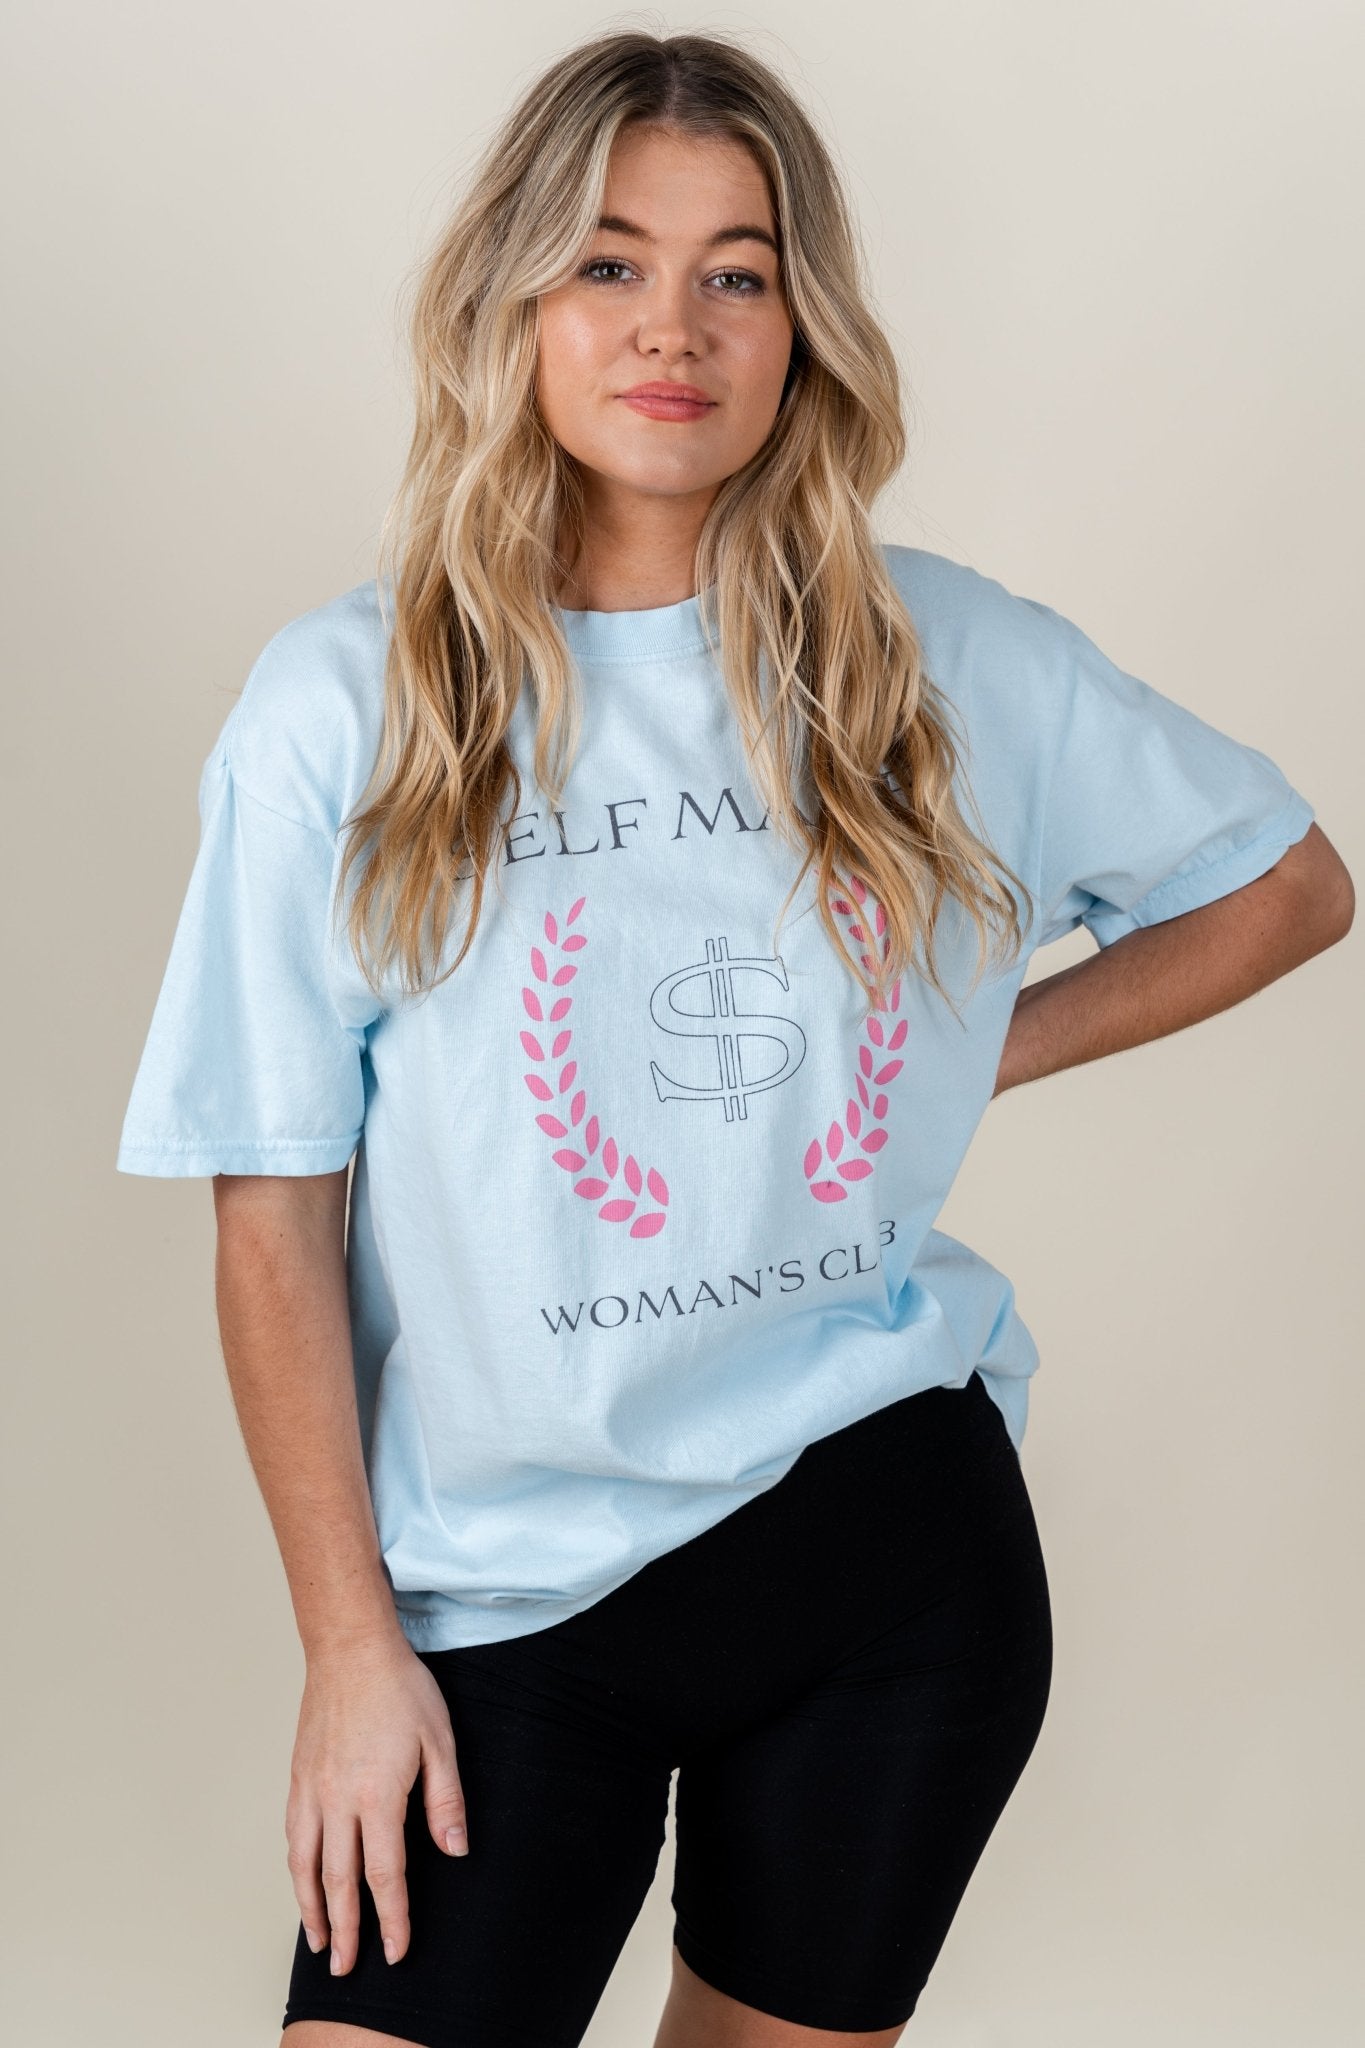 Self made woman's club t-shirt soothing blue - Affordable T-shirt - Boutique Graphic T-Shirts at Lush Fashion Lounge Boutique in Oklahoma City